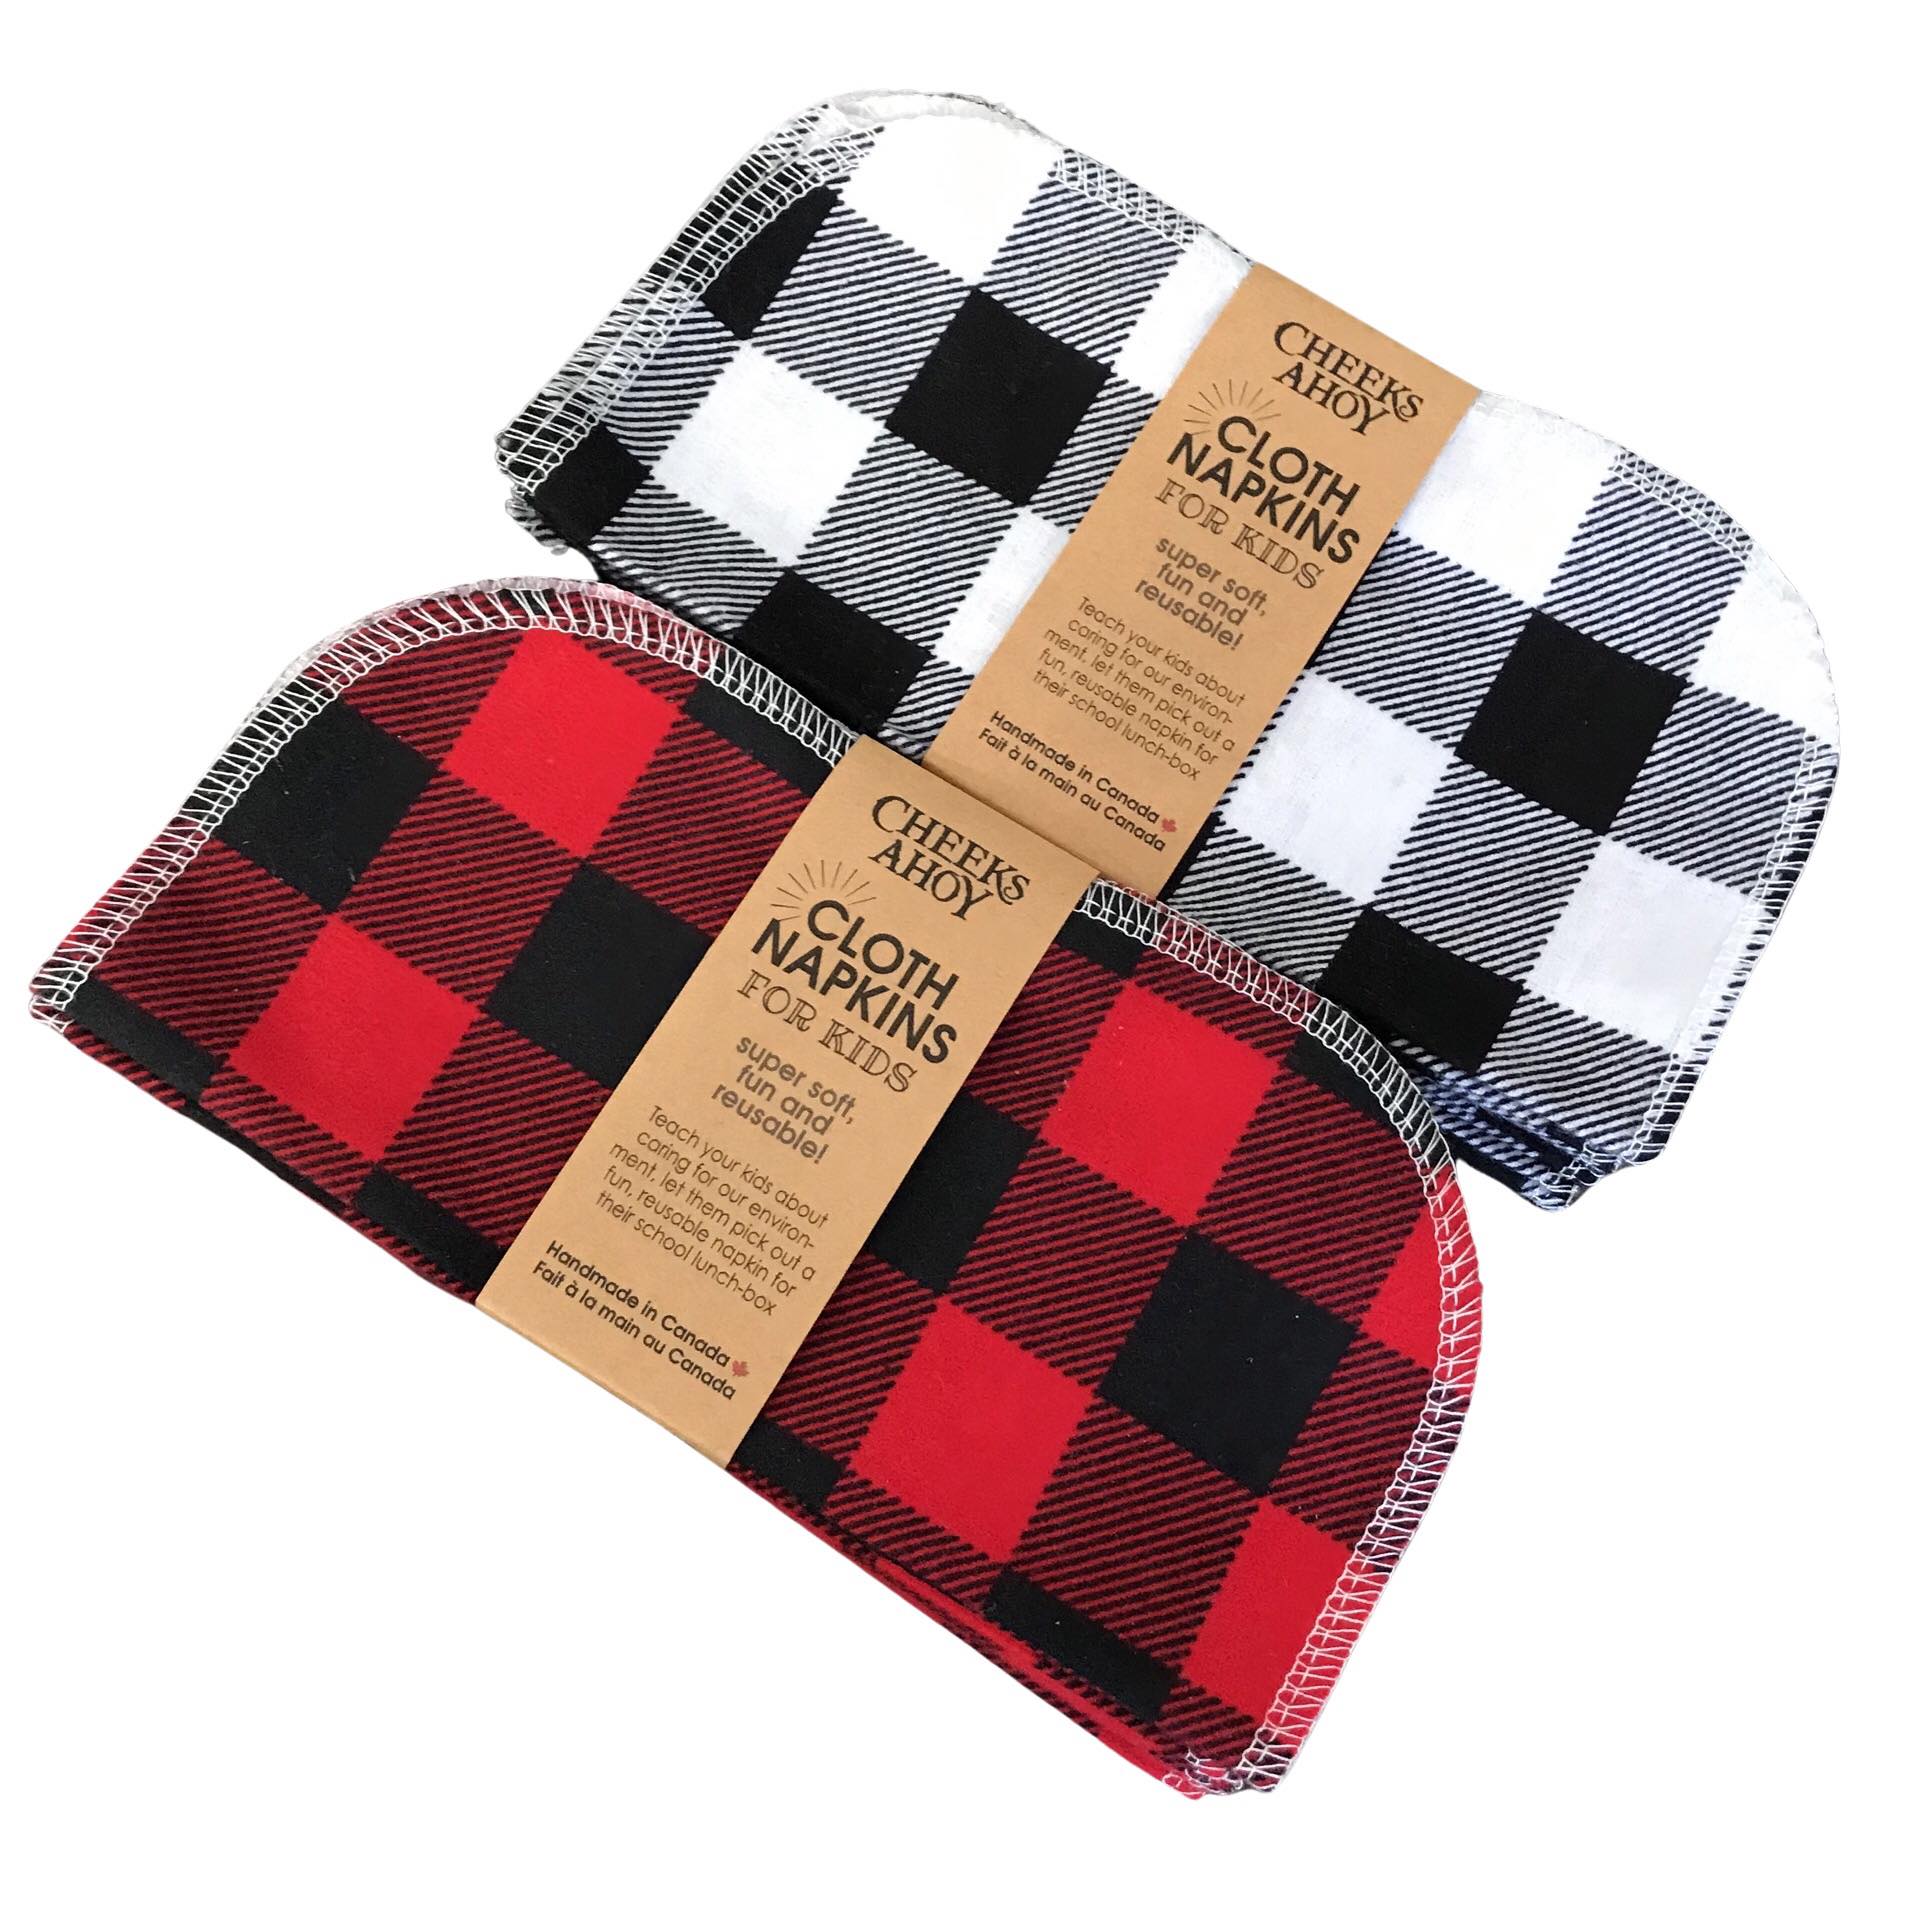 This collection of 10 plaid napikins made in Canada by Cheeks Ahoy are made of cotton flannel which makes them super soft, fun AND FESTIVE!